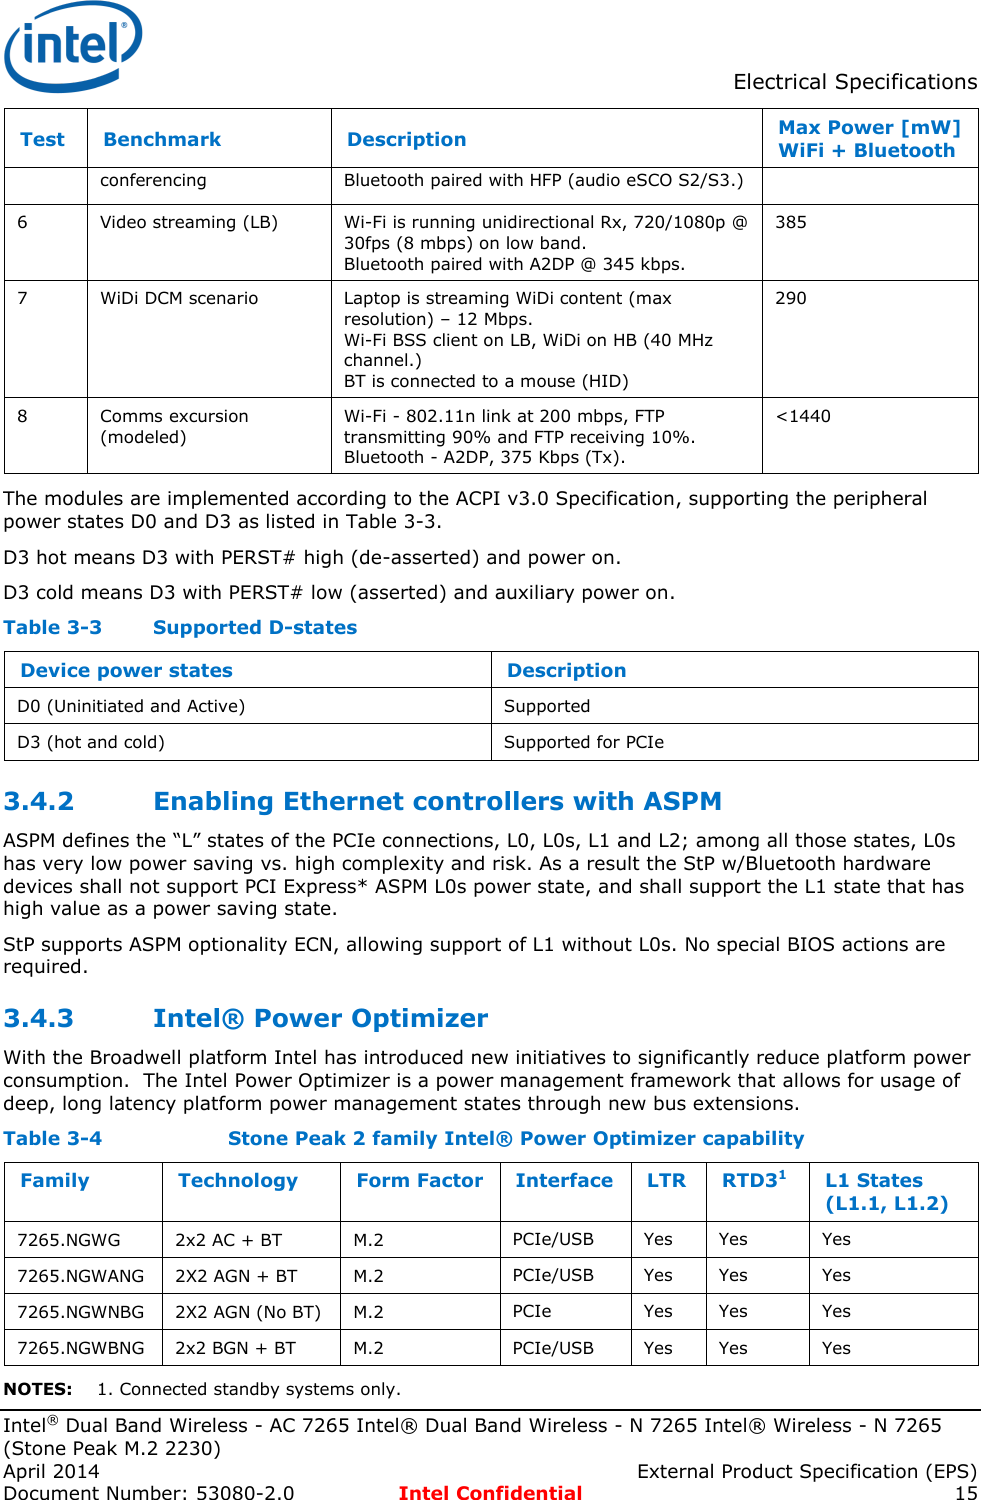  Electrical Specifications  Intel® Dual Band Wireless - AC 7265 Intel® Dual Band Wireless - N 7265 Intel® Wireless - N 7265 (Stone Peak M.2 2230) April 2014    External Product Specification (EPS) Document Number: 53080-2.0  Intel Confidential 15 Test Benchmark Description Max Power [mW] WiFi + Bluetooth conferencing  Bluetooth paired with HFP (audio eSCO S2/S3.) 6 Video streaming (LB) Wi-Fi is running unidirectional Rx, 720/1080p @ 30fps (8 mbps) on low band. Bluetooth paired with A2DP @ 345 kbps. 385 7 WiDi DCM scenario Laptop is streaming WiDi content (max resolution) – 12 Mbps. Wi-Fi BSS client on LB, WiDi on HB (40 MHz channel.) BT is connected to a mouse (HID) 290 8 Comms excursion (modeled) Wi-Fi - 802.11n link at 200 mbps, FTP transmitting 90% and FTP receiving 10%. Bluetooth - A2DP, 375 Kbps (Tx). &lt;1440 The modules are implemented according to the ACPI v3.0 Specification, supporting the peripheral power states D0 and D3 as listed in Table 3-3. D3 hot means D3 with PERST# high (de-asserted) and power on. D3 cold means D3 with PERST# low (asserted) and auxiliary power on. Table 3-3  Supported D-states Device power states Description D0 (Uninitiated and Active) Supported D3 (hot and cold) Supported for PCIe 3.4.2 Enabling Ethernet controllers with ASPM ASPM defines the “L” states of the PCIe connections, L0, L0s, L1 and L2; among all those states, L0s has very low power saving vs. high complexity and risk. As a result the StP w/Bluetooth hardware devices shall not support PCI Express* ASPM L0s power state, and shall support the L1 state that has high value as a power saving state. StP supports ASPM optionality ECN, allowing support of L1 without L0s. No special BIOS actions are required. 3.4.3 Intel® Power Optimizer With the Broadwell platform Intel has introduced new initiatives to significantly reduce platform power consumption.  The Intel Power Optimizer is a power management framework that allows for usage of deep, long latency platform power management states through new bus extensions. Table 3-4    Stone Peak 2 family Intel® Power Optimizer capability Family Technology Form Factor Interface LTR RTD31 L1 States (L1.1, L1.2) 7265.NGWG 2x2 AC + BT M.2 PCIe/USB Yes Yes Yes 7265.NGWANG 2X2 AGN + BT M.2 PCIe/USB Yes Yes Yes 7265.NGWNBG 2X2 AGN (No BT) M.2 PCIe Yes Yes Yes 7265.NGWBNG 2x2 BGN + BT M.2 PCIe/USB Yes Yes Yes NOTES: 1. Connected standby systems only. 